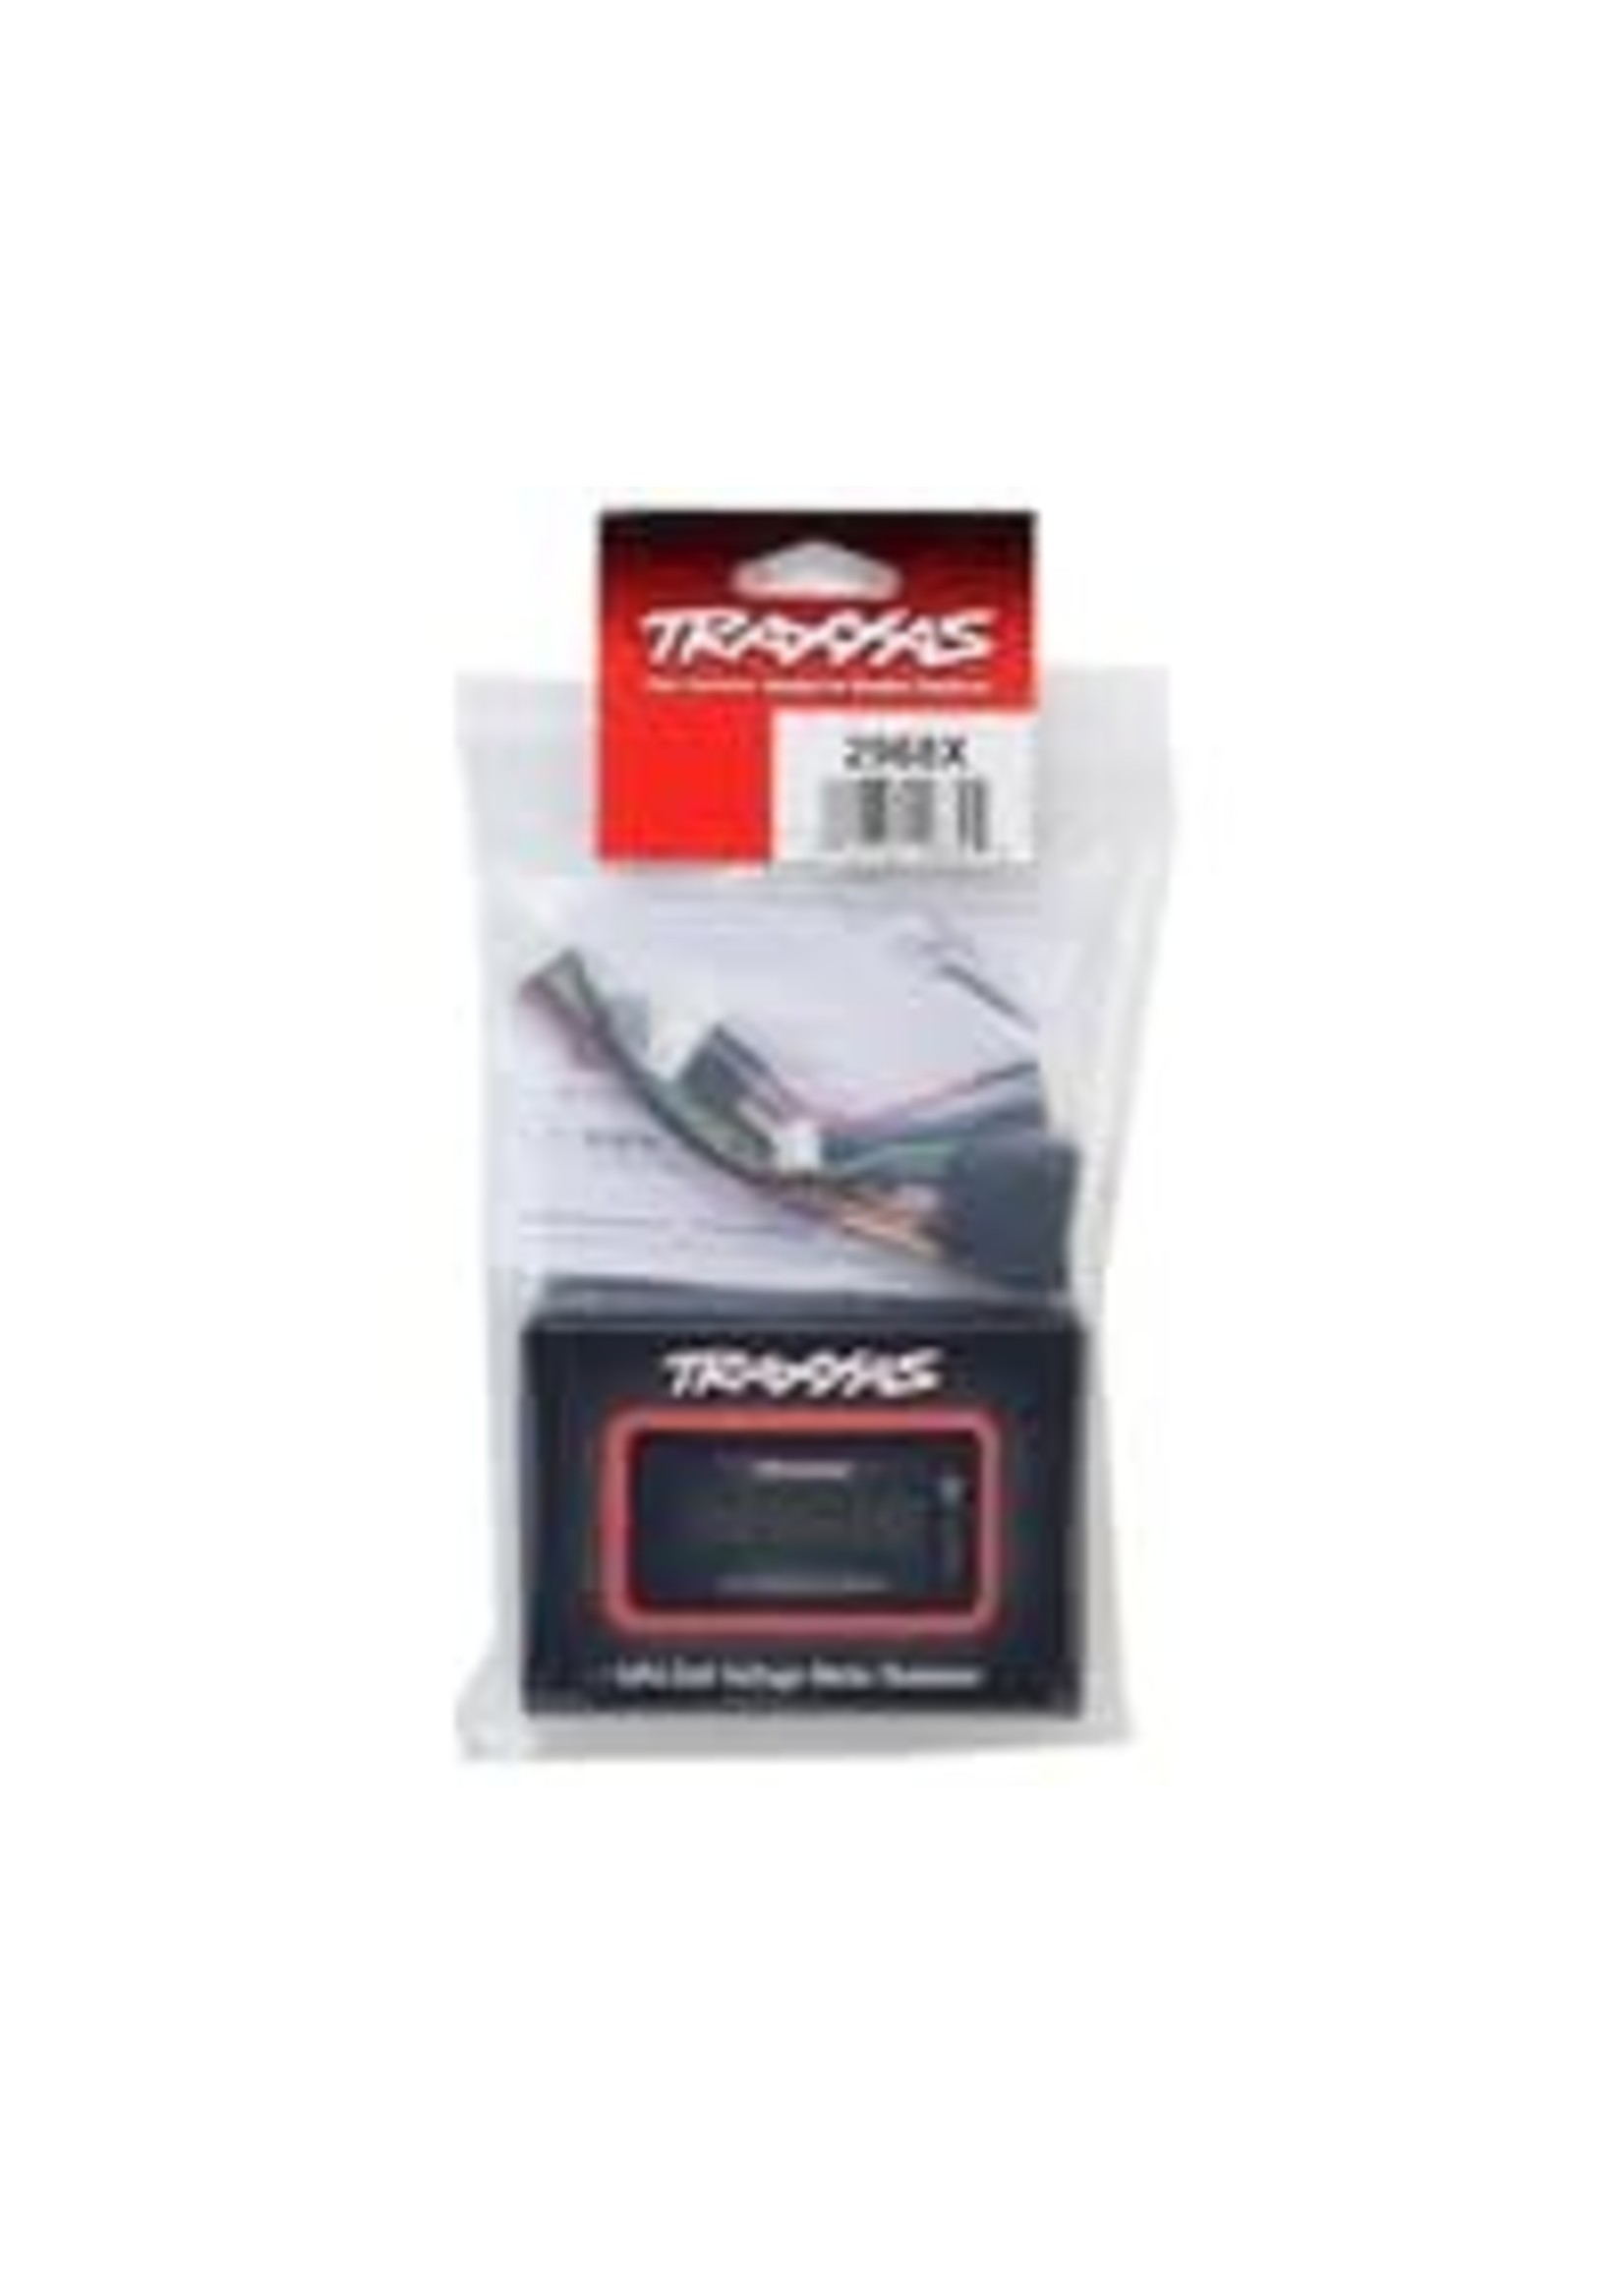 Traxxas 2968X LiPo cell voltage checker/balancer (includes #2938X adapter for Traxxas iD batteries)